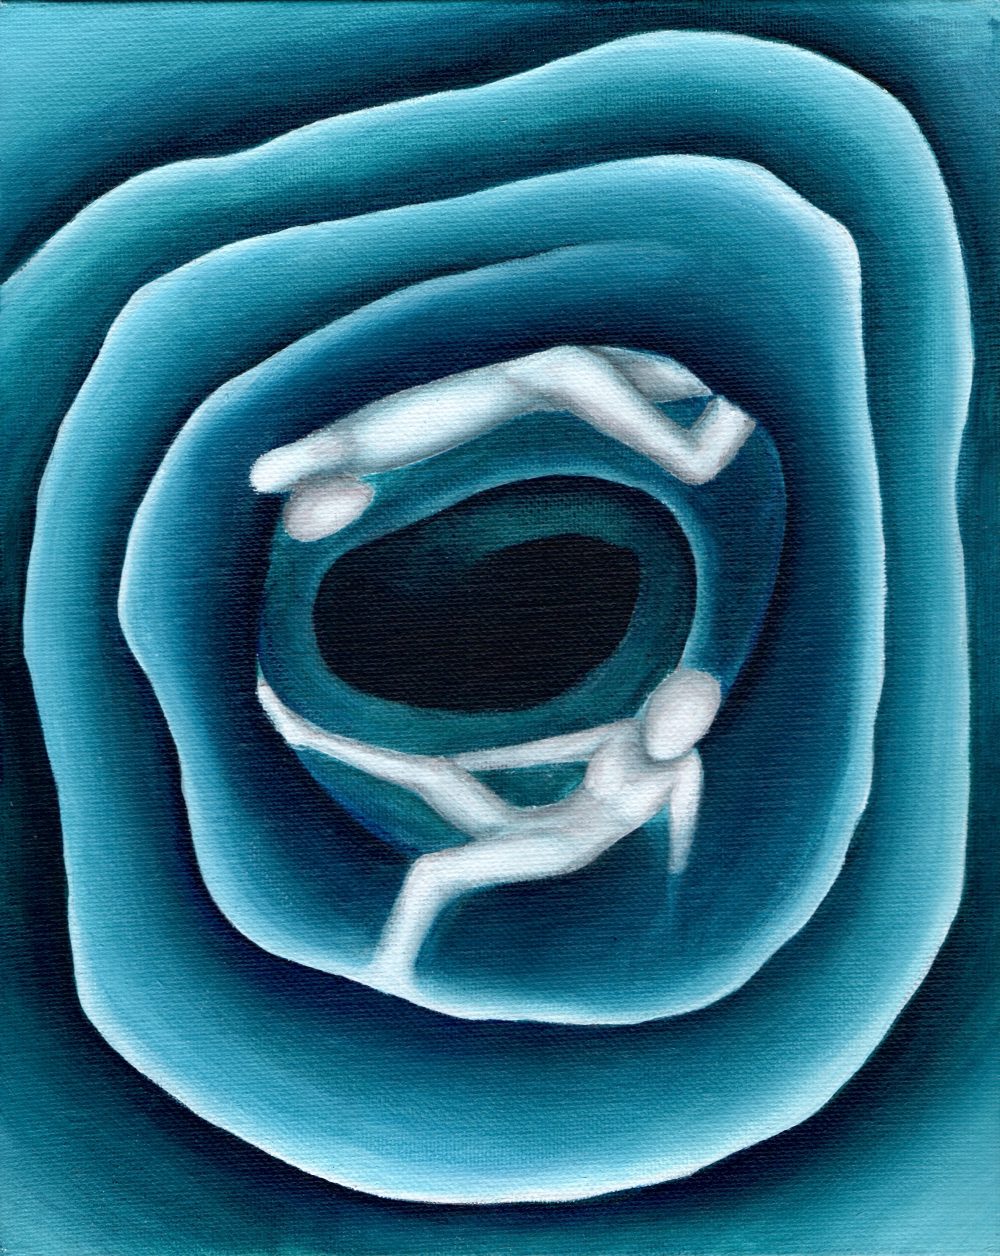 A painting in greenish blue tones of an abstract spiral background with two white human figures in the center.